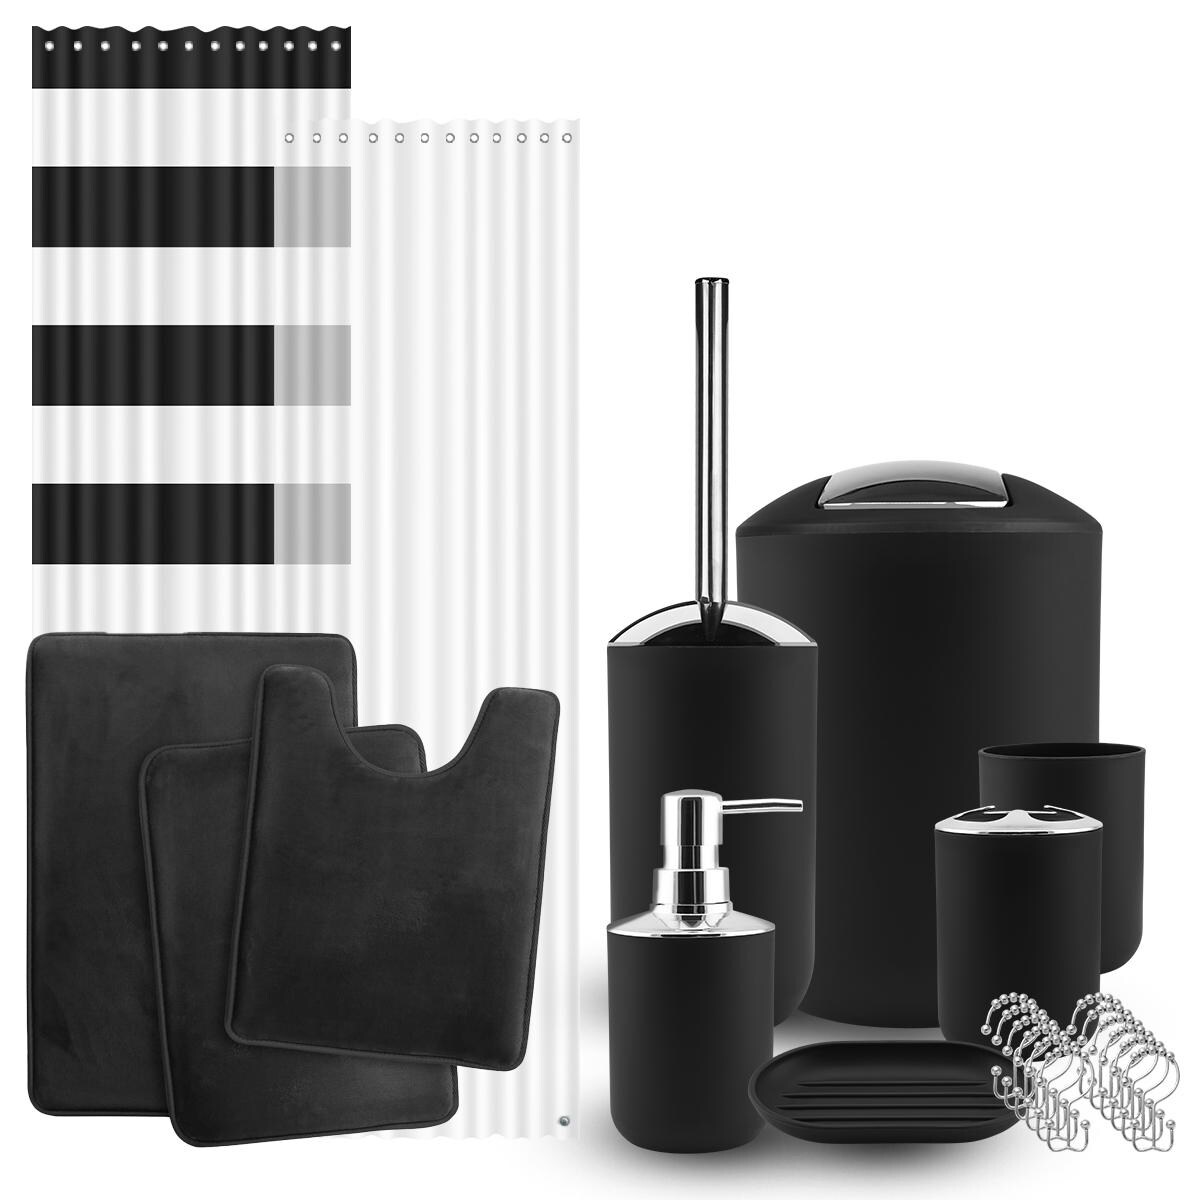 Clara Clark Bathroom Set - Black Bathroom Accessories Set, Bathroom Sets  with Shower Curtain and Rugs, 23PC Shower Curtain Set with Liner, Soap